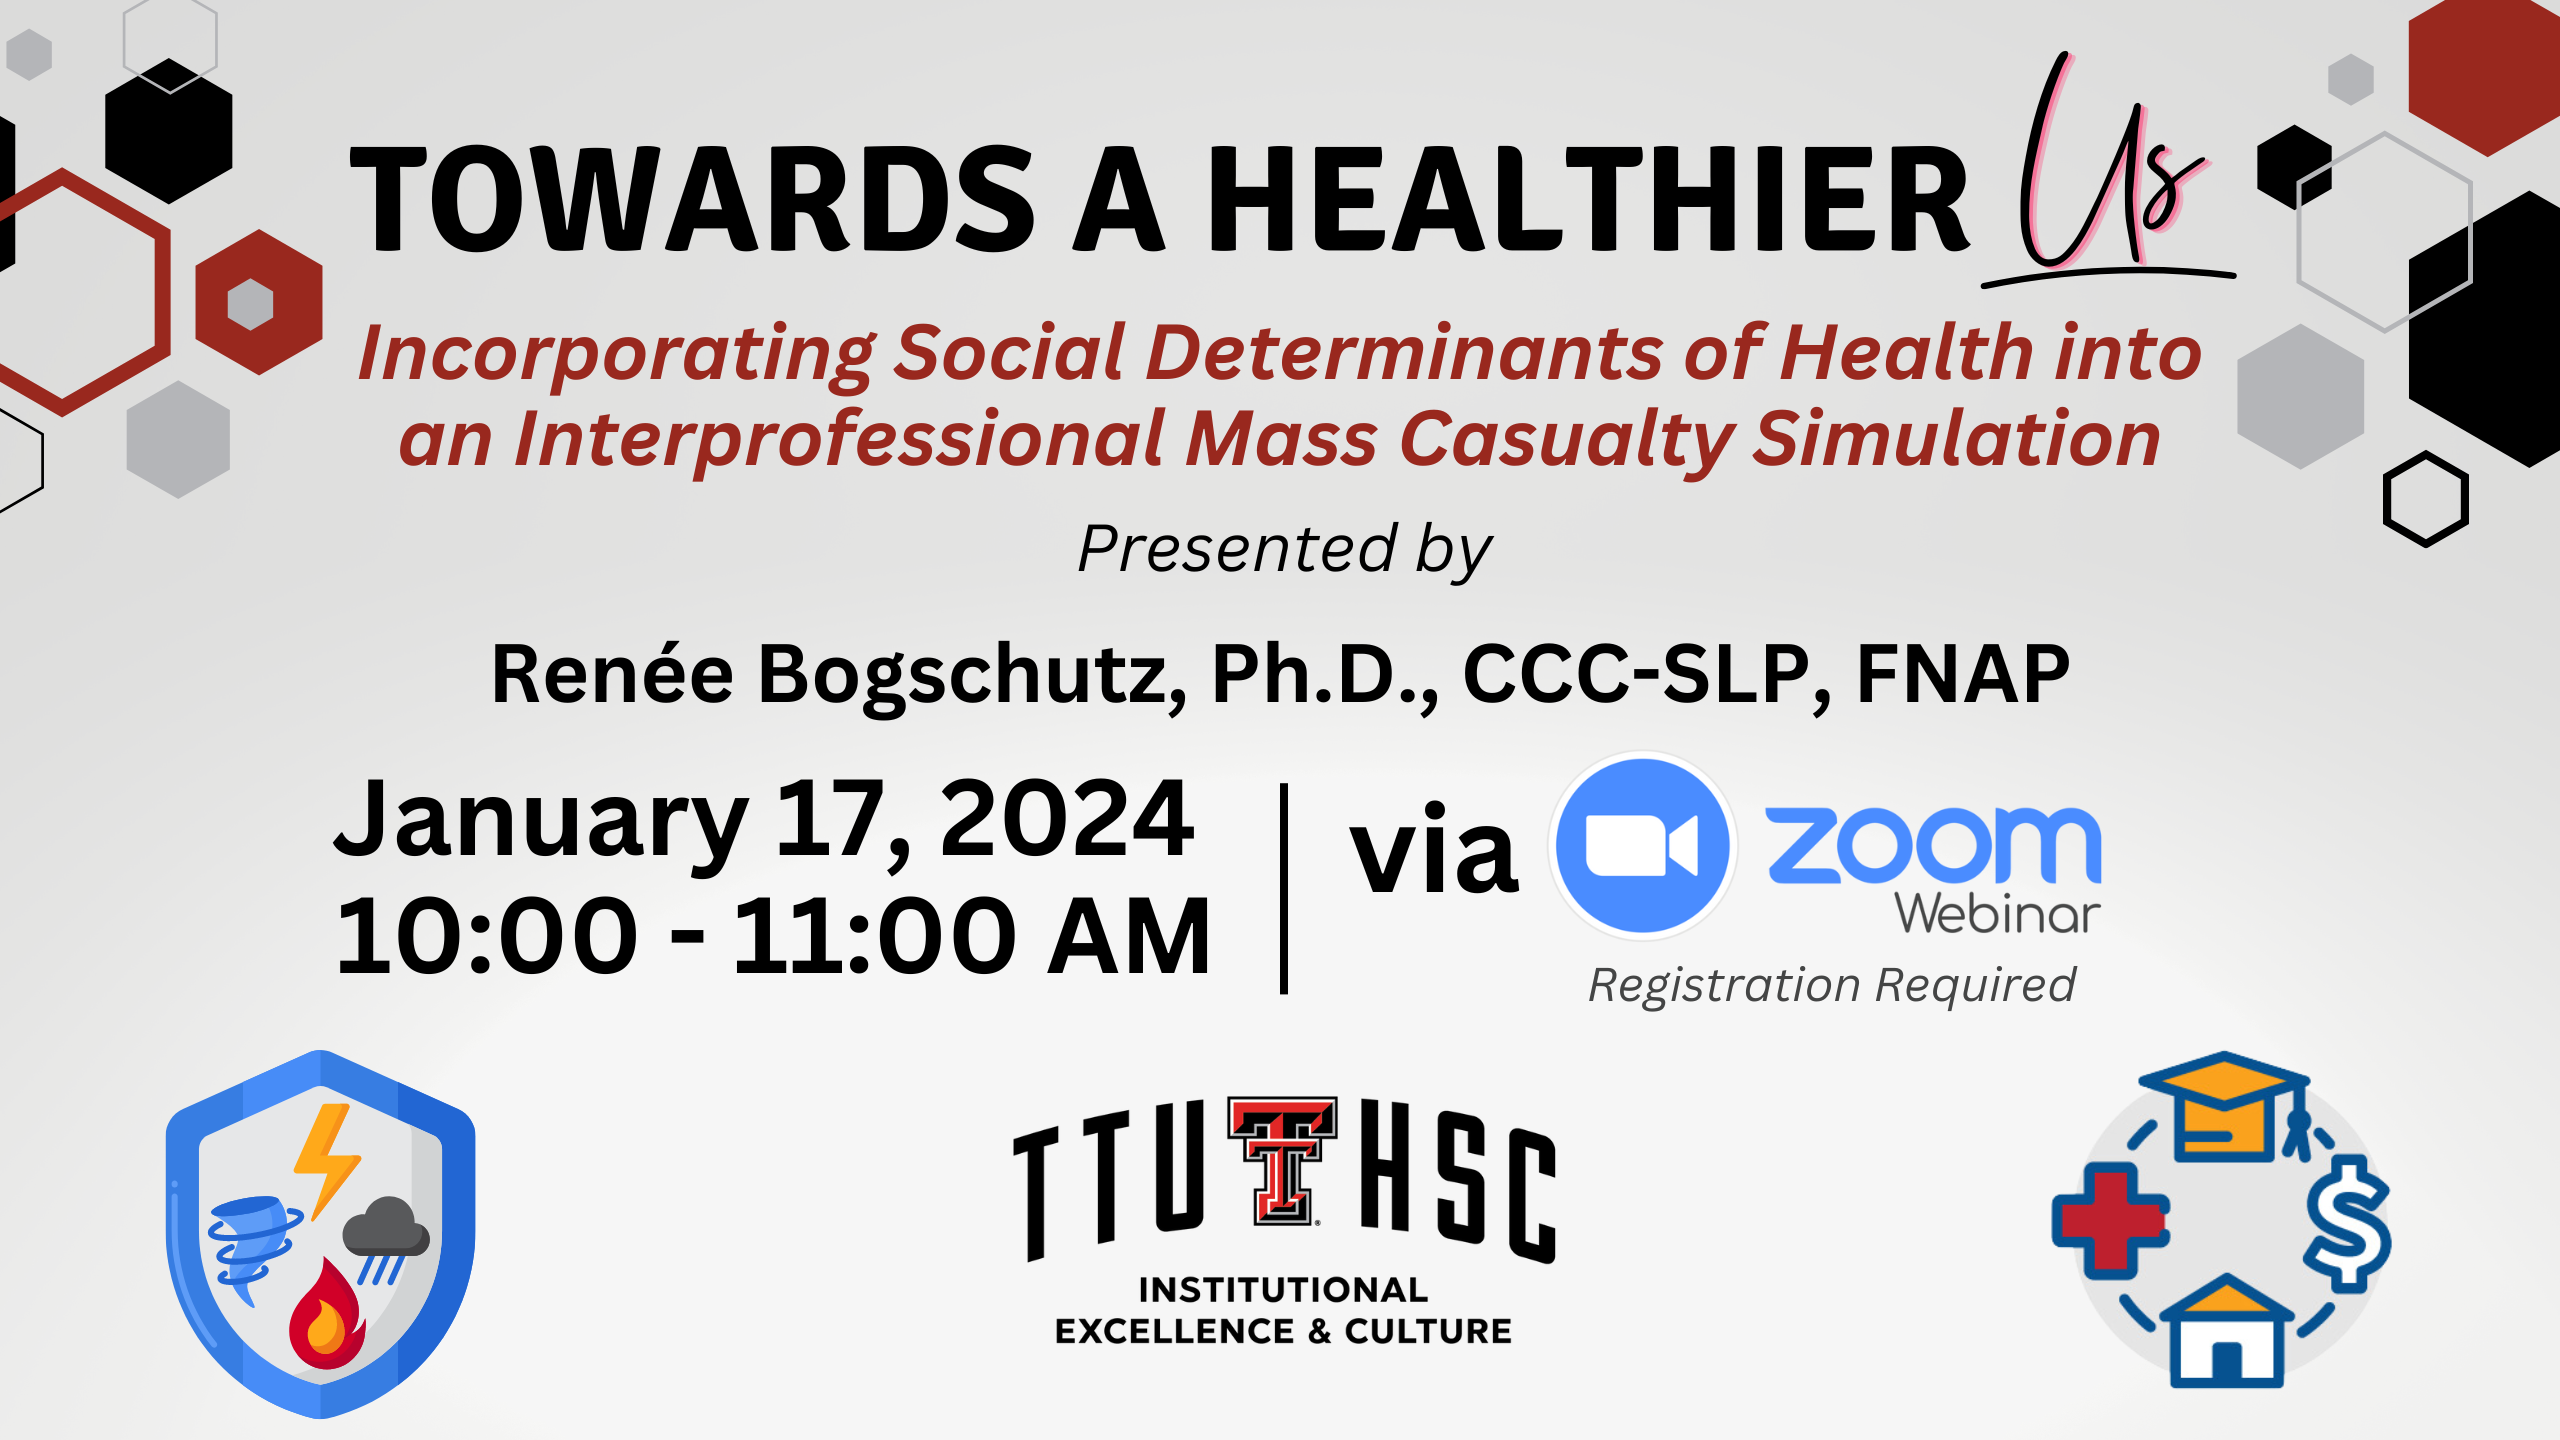 Towards a Healthier Us --  Incorporating Social Determinants of Health into an Interprofessional Mass Casualty Simulation, Presented by Renee Bogschutz. January 17, 2024, 10 to 11 am via Zoom Webinar. Registration required. Three icons at the bottom; one is a shielf with weather elements, one is the Division of Institutional Excellence & Culture's logo, and one is a circular logo depicting education, healthcare access, housing, and income